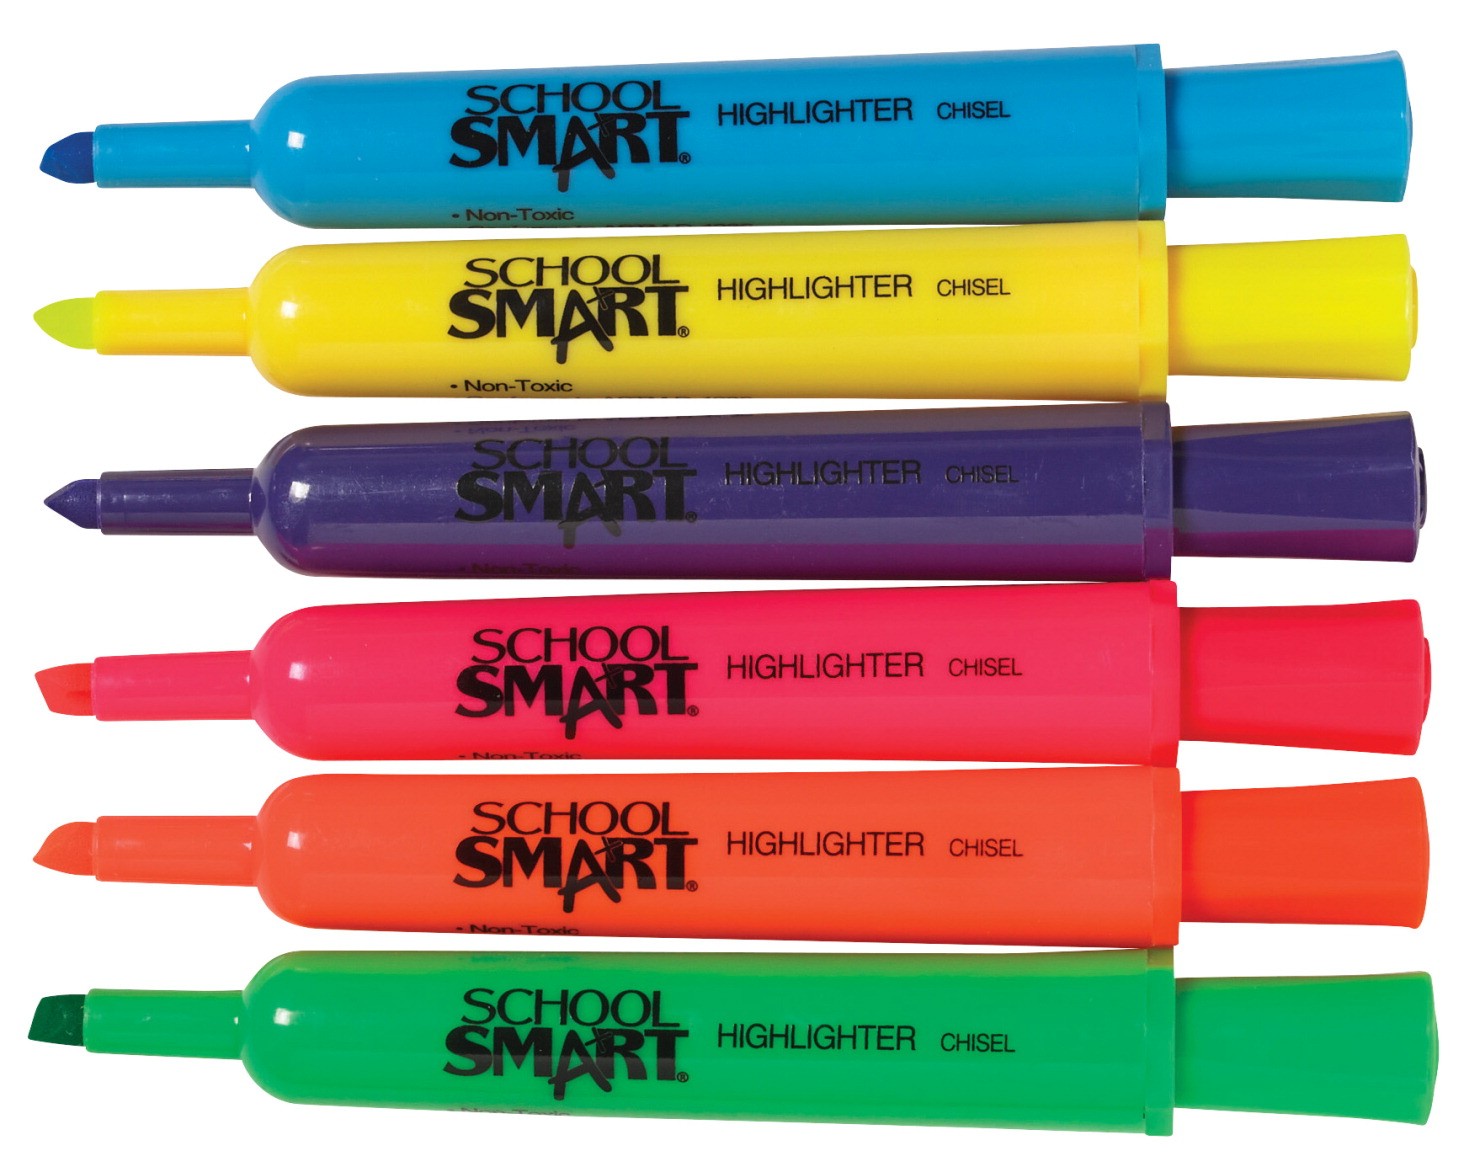 School Smart Non-Toxic Tank Style Highlighter Set, Chisel Tip, Assorted Colors, Set of 6